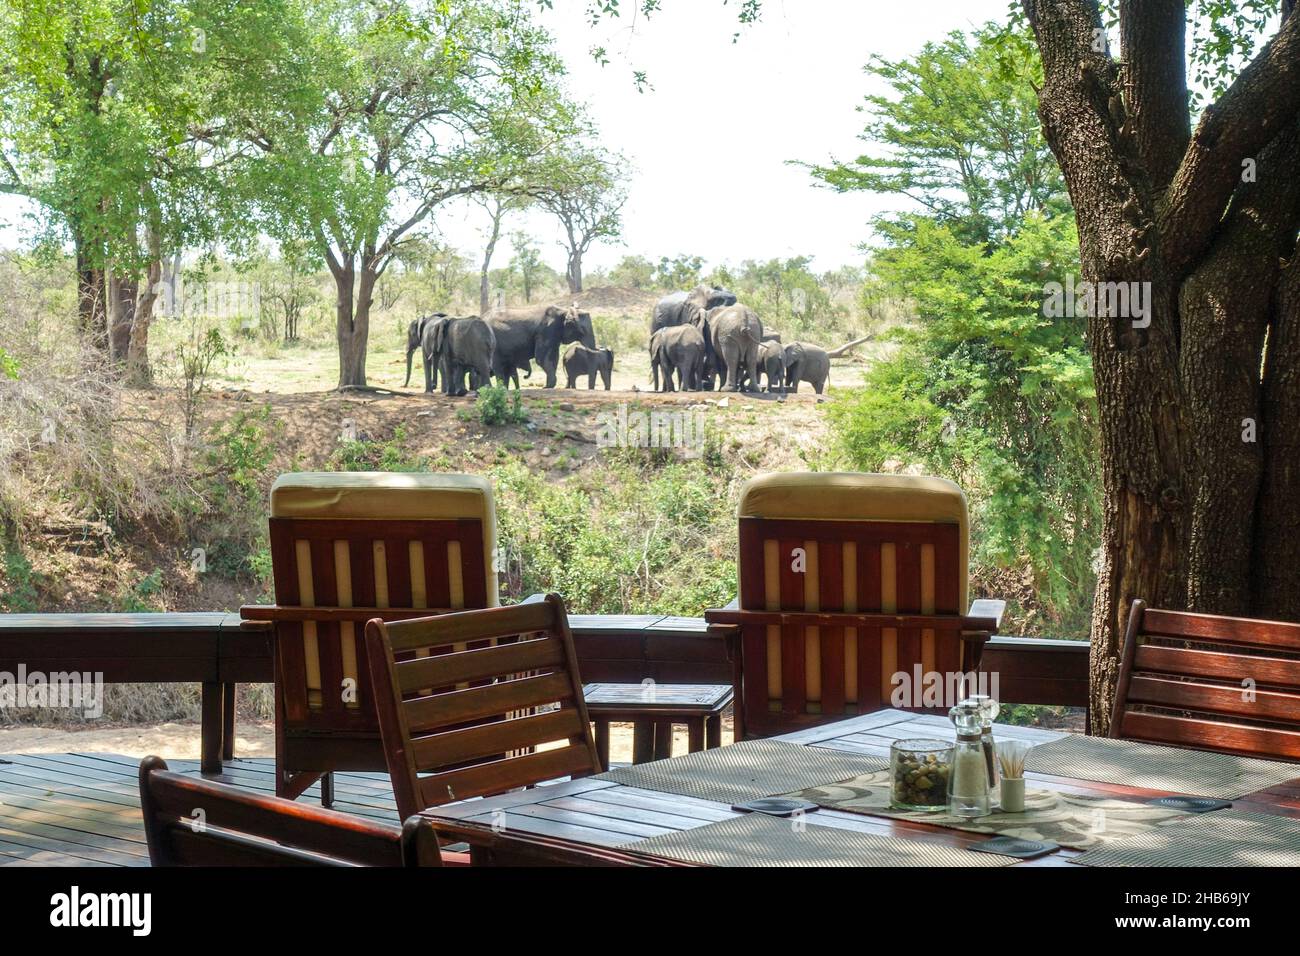 Luxury lodge table and elephants at a waterhole in the Kruger National Park, South Africa Stock Photo